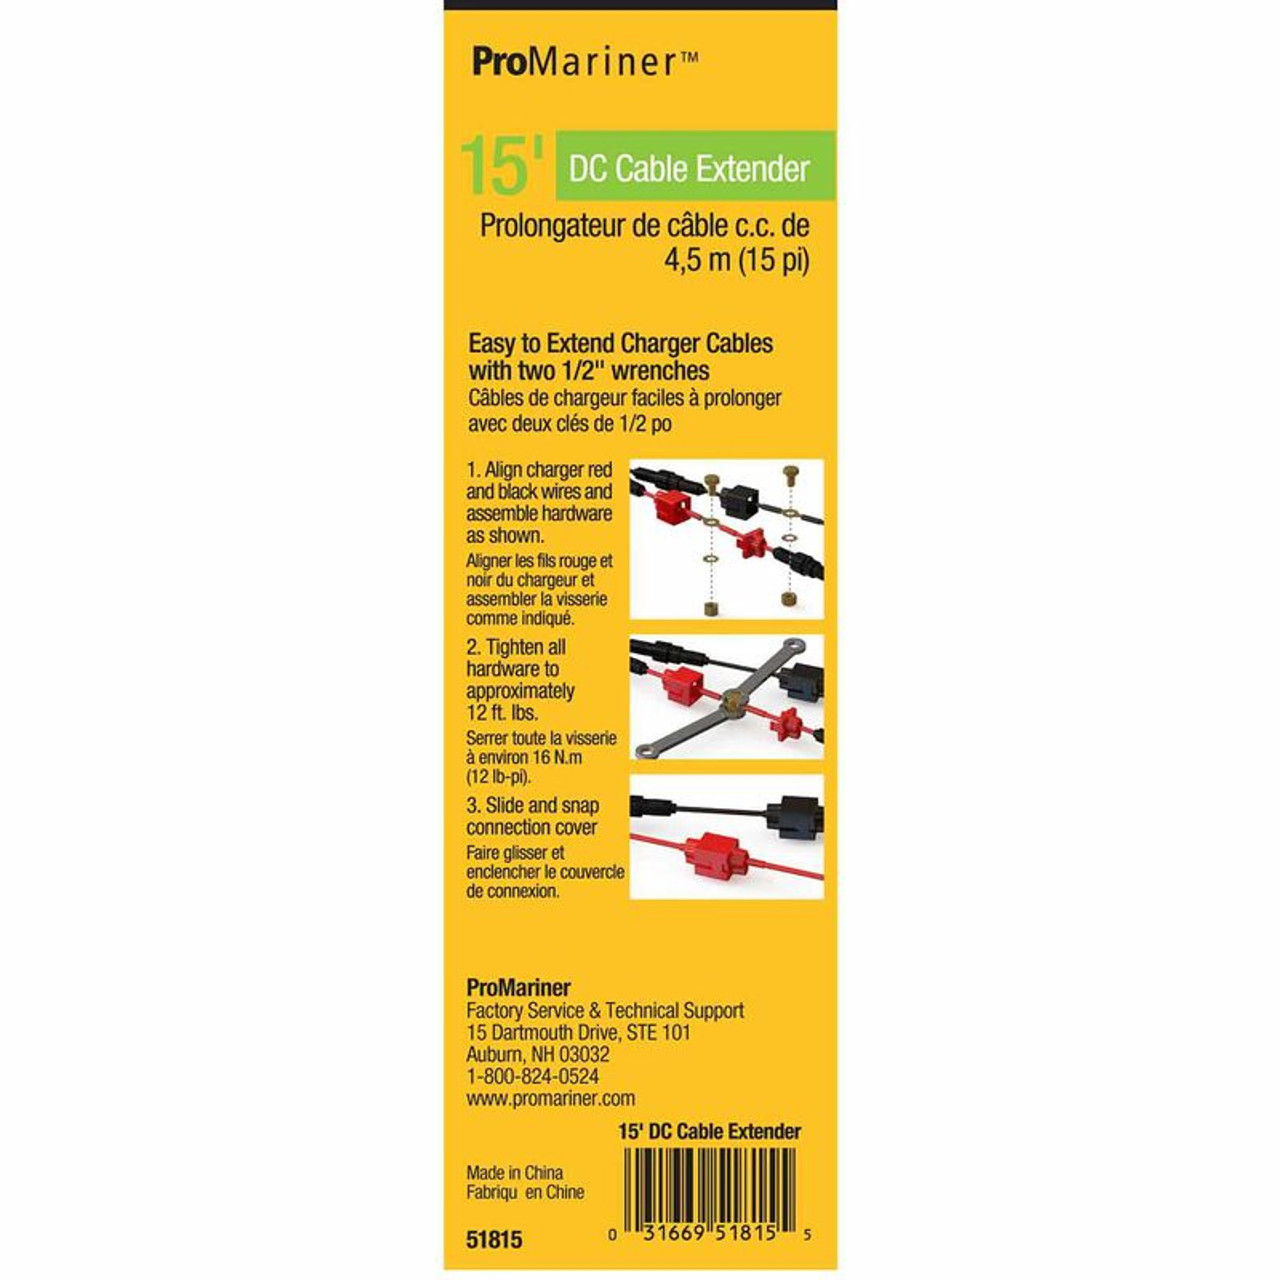 PROMARINER 15' Charger DC Cable Extender PN 51815